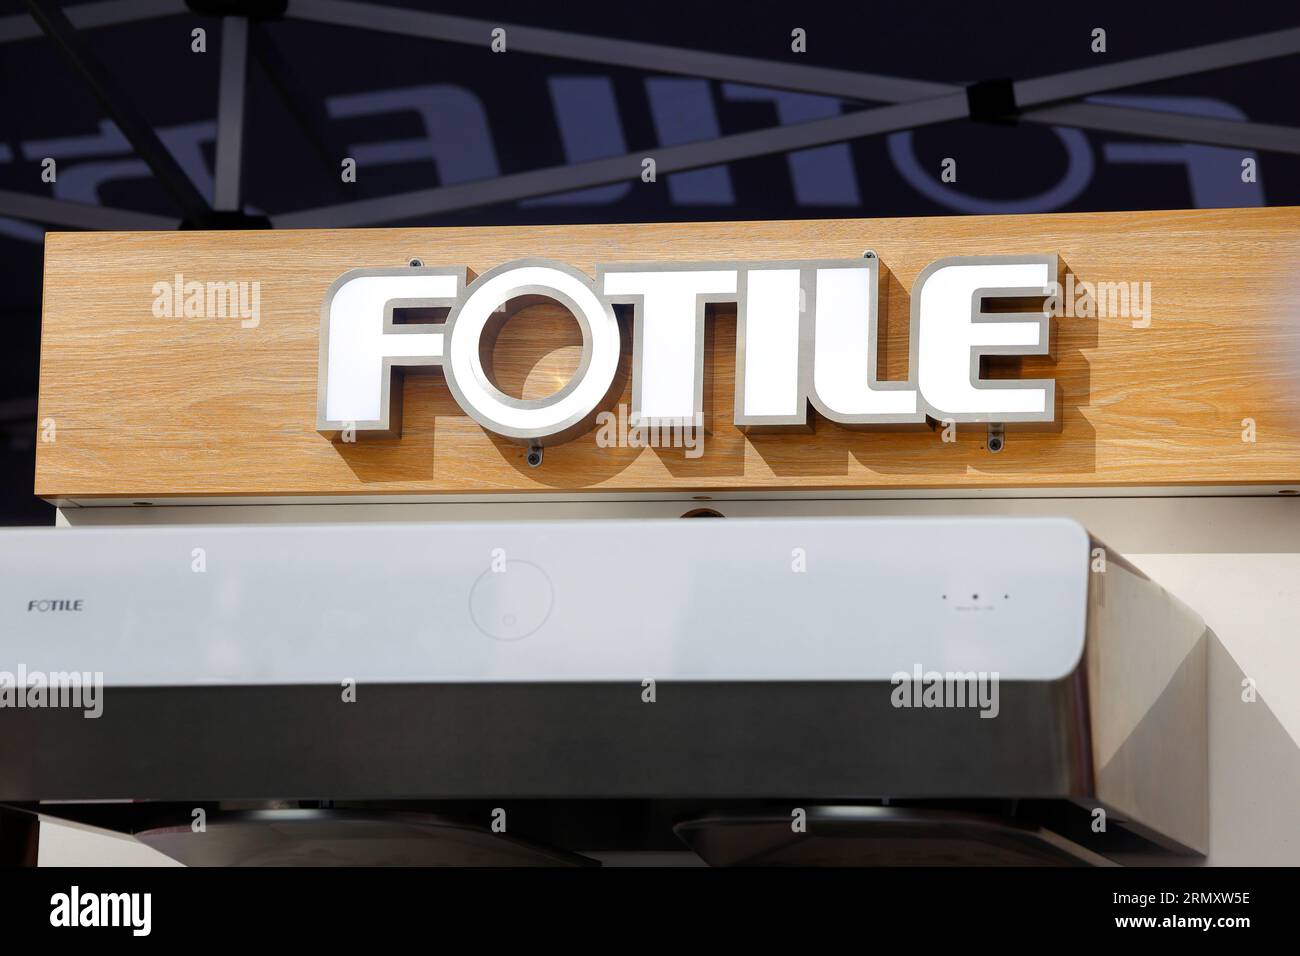 Signage for Fotile, a Chinese brand kitchen appliance, and range hood maker headquartered in Ningbo, China. Stock Photo